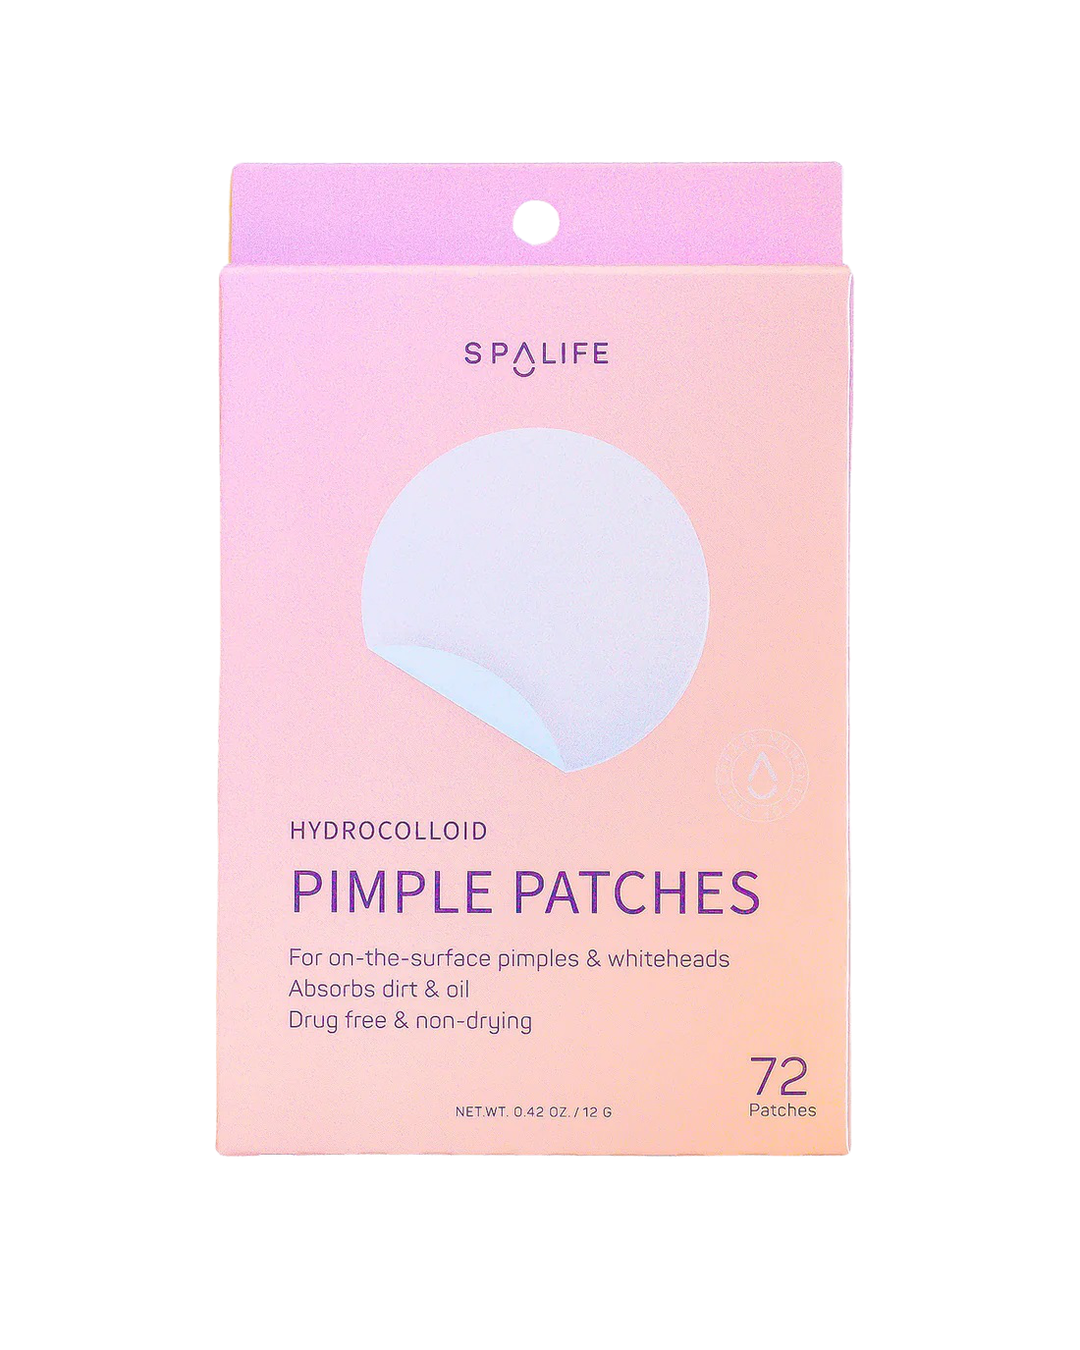 Hydrocolloid Pimple Patches 72ct - (Pink)